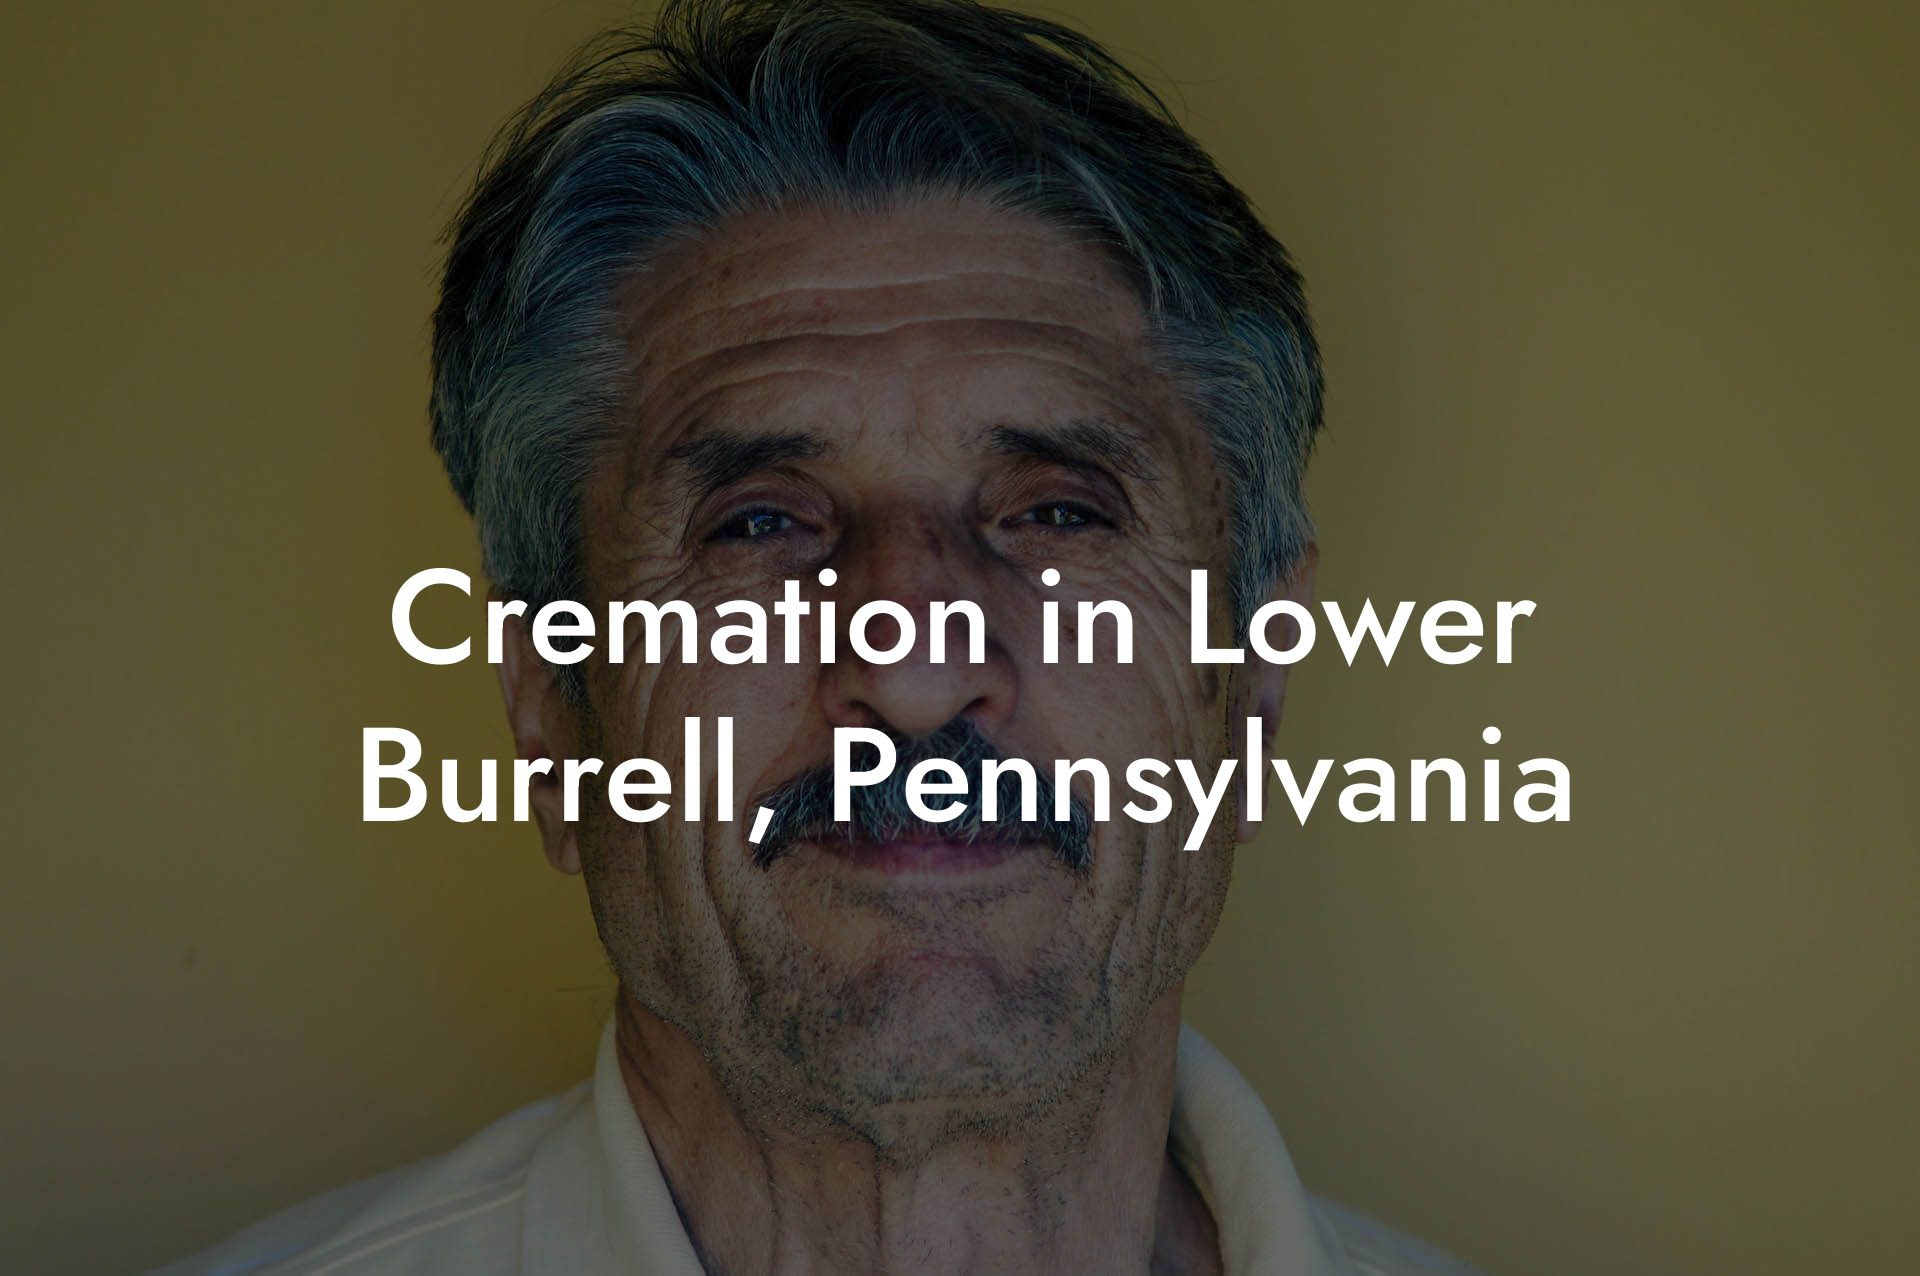 Cremation in Lower Burrell, Pennsylvania